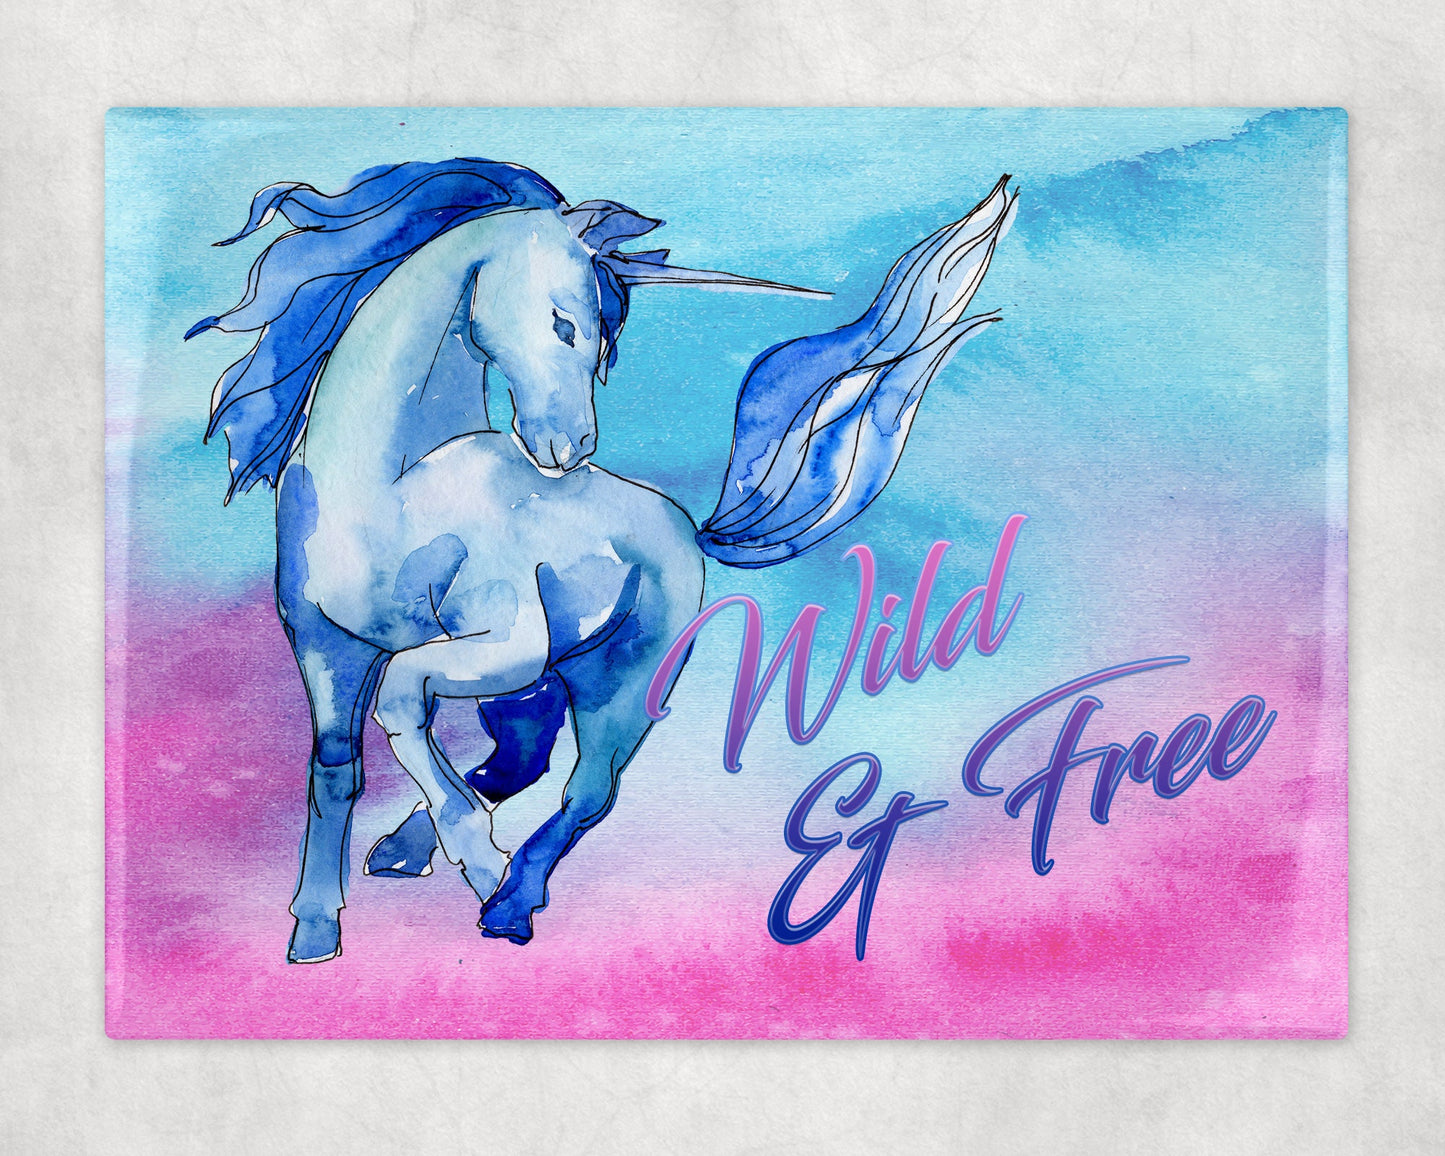 Wild & Free Unicorn Art Decorative Ceramic Tile with Optional Easel Back - 6x8 inches